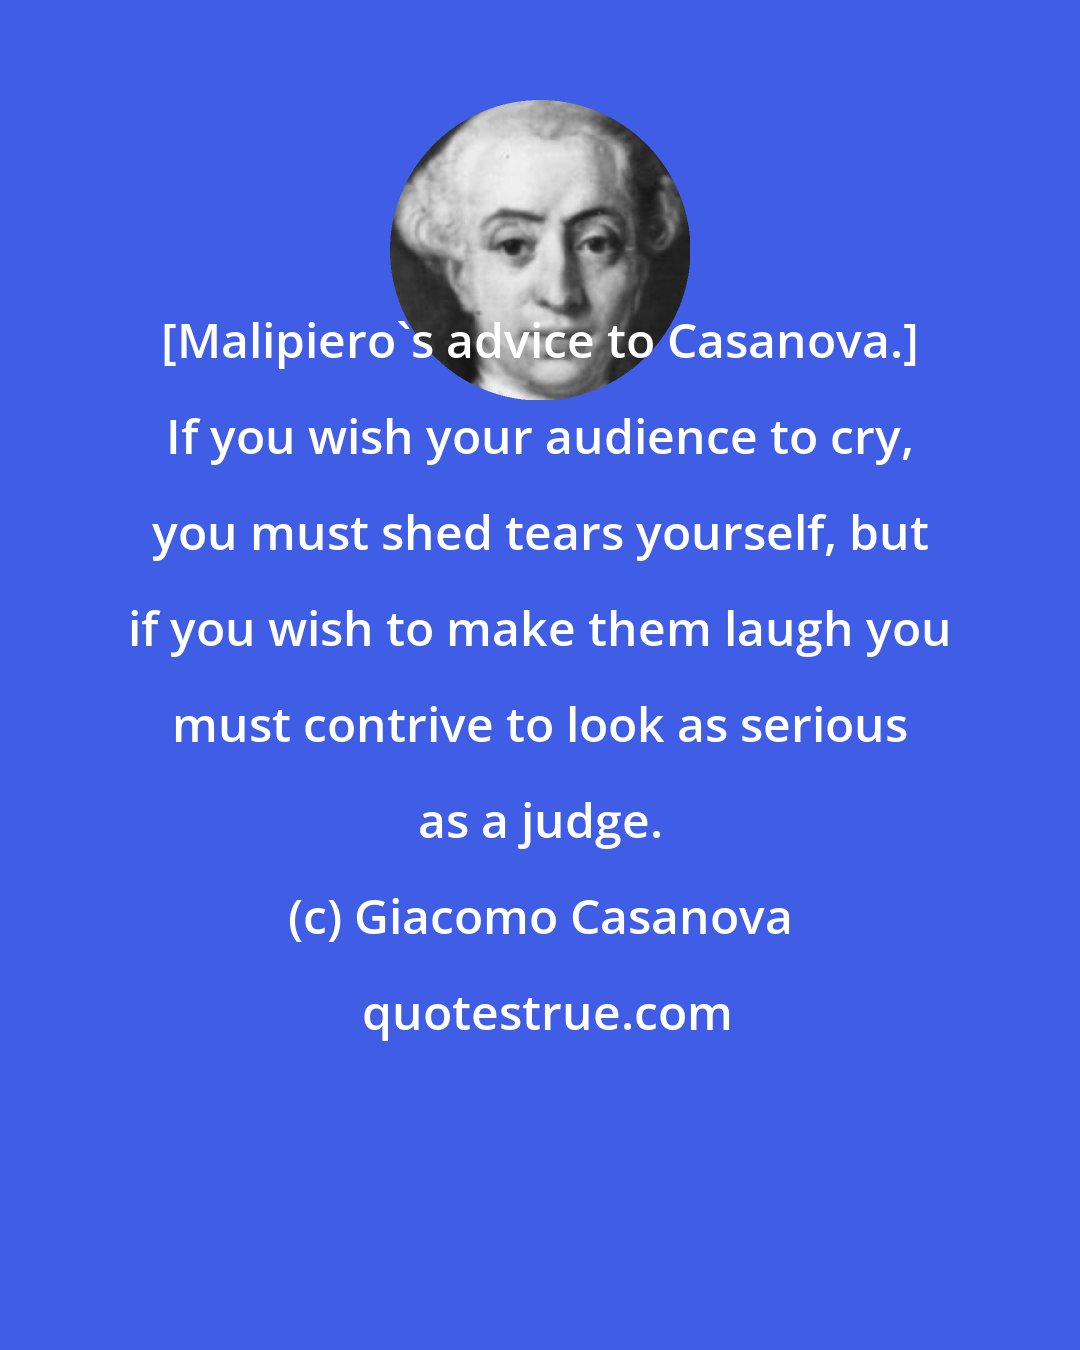 Giacomo Casanova: [Malipiero's advice to Casanova.] If you wish your audience to cry, you must shed tears yourself, but if you wish to make them laugh you must contrive to look as serious as a judge.